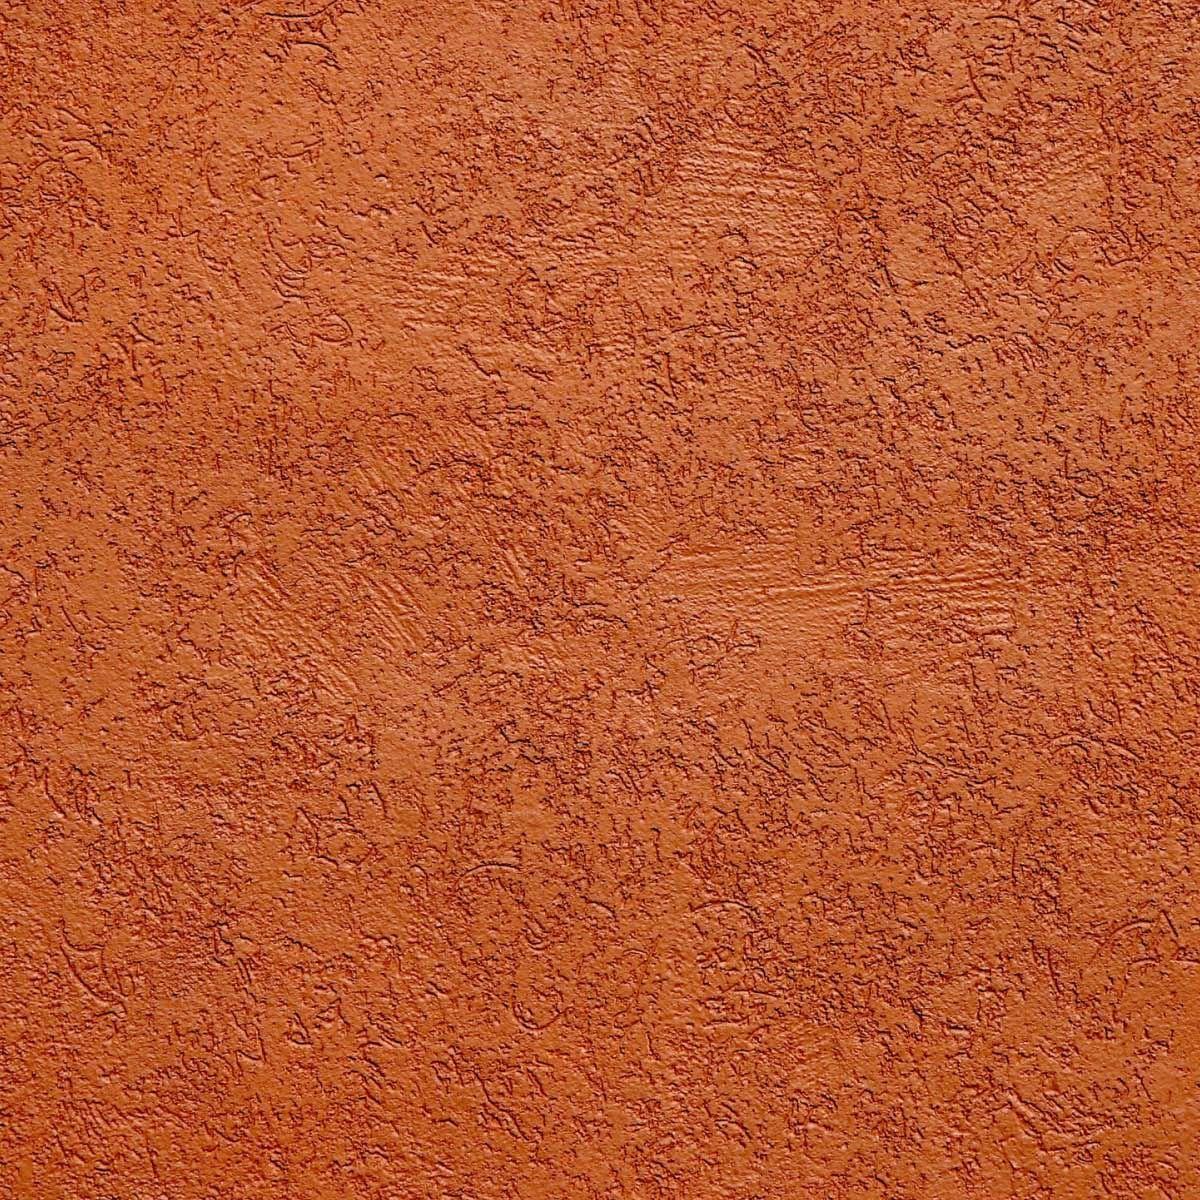 Rust Colored Logo - Rust colored textured stucco wall. | Design and Architecture in 2019 ...